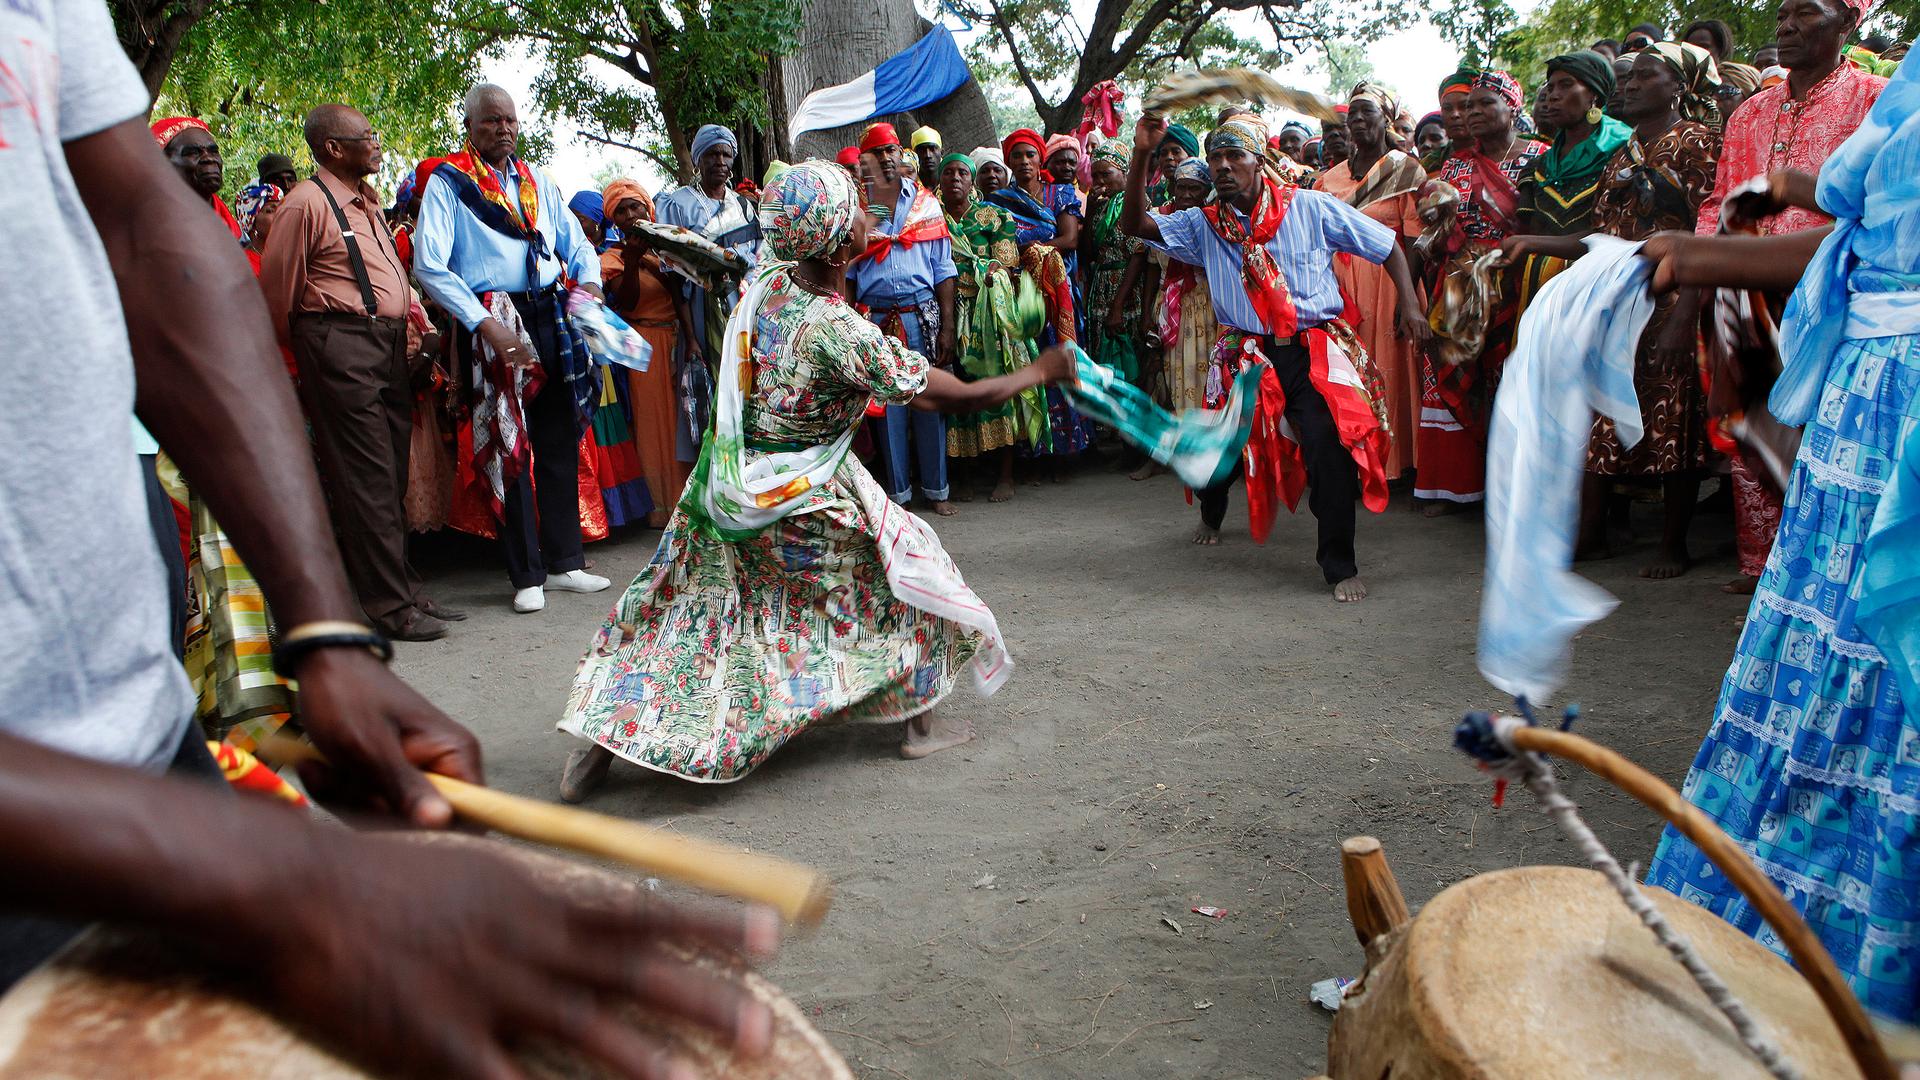 Haitians dance under a sacred ceibo tree in a voodoo ritual on the third day of the annual gathering in the Souvenance community. Descendants of the people of Dahomey, a former kingdom in what is now present-day Benin, show their devotion to their ancesto